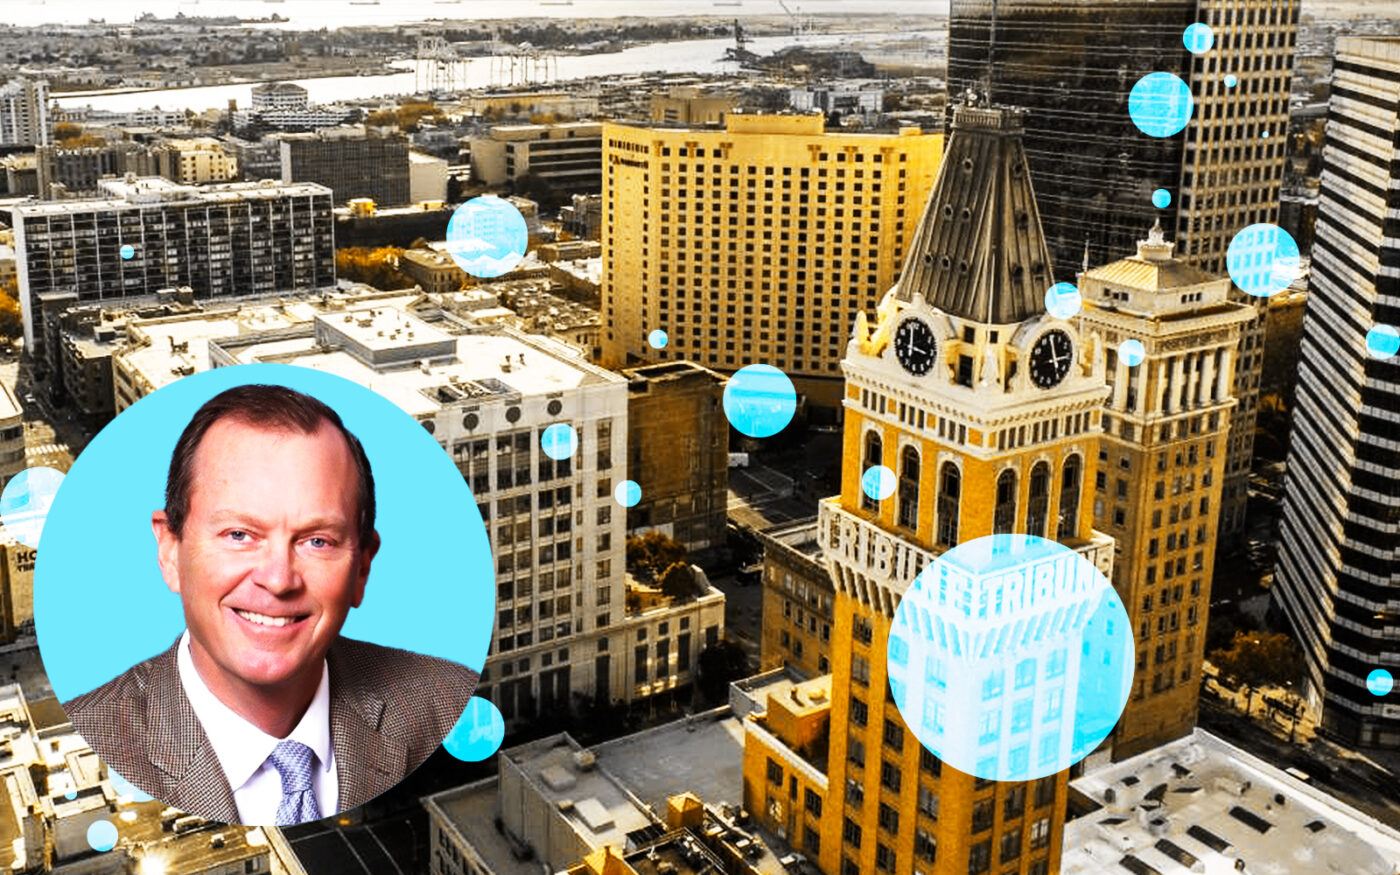 Cushman & Wakefield's John Dolby and Downtown Oakland